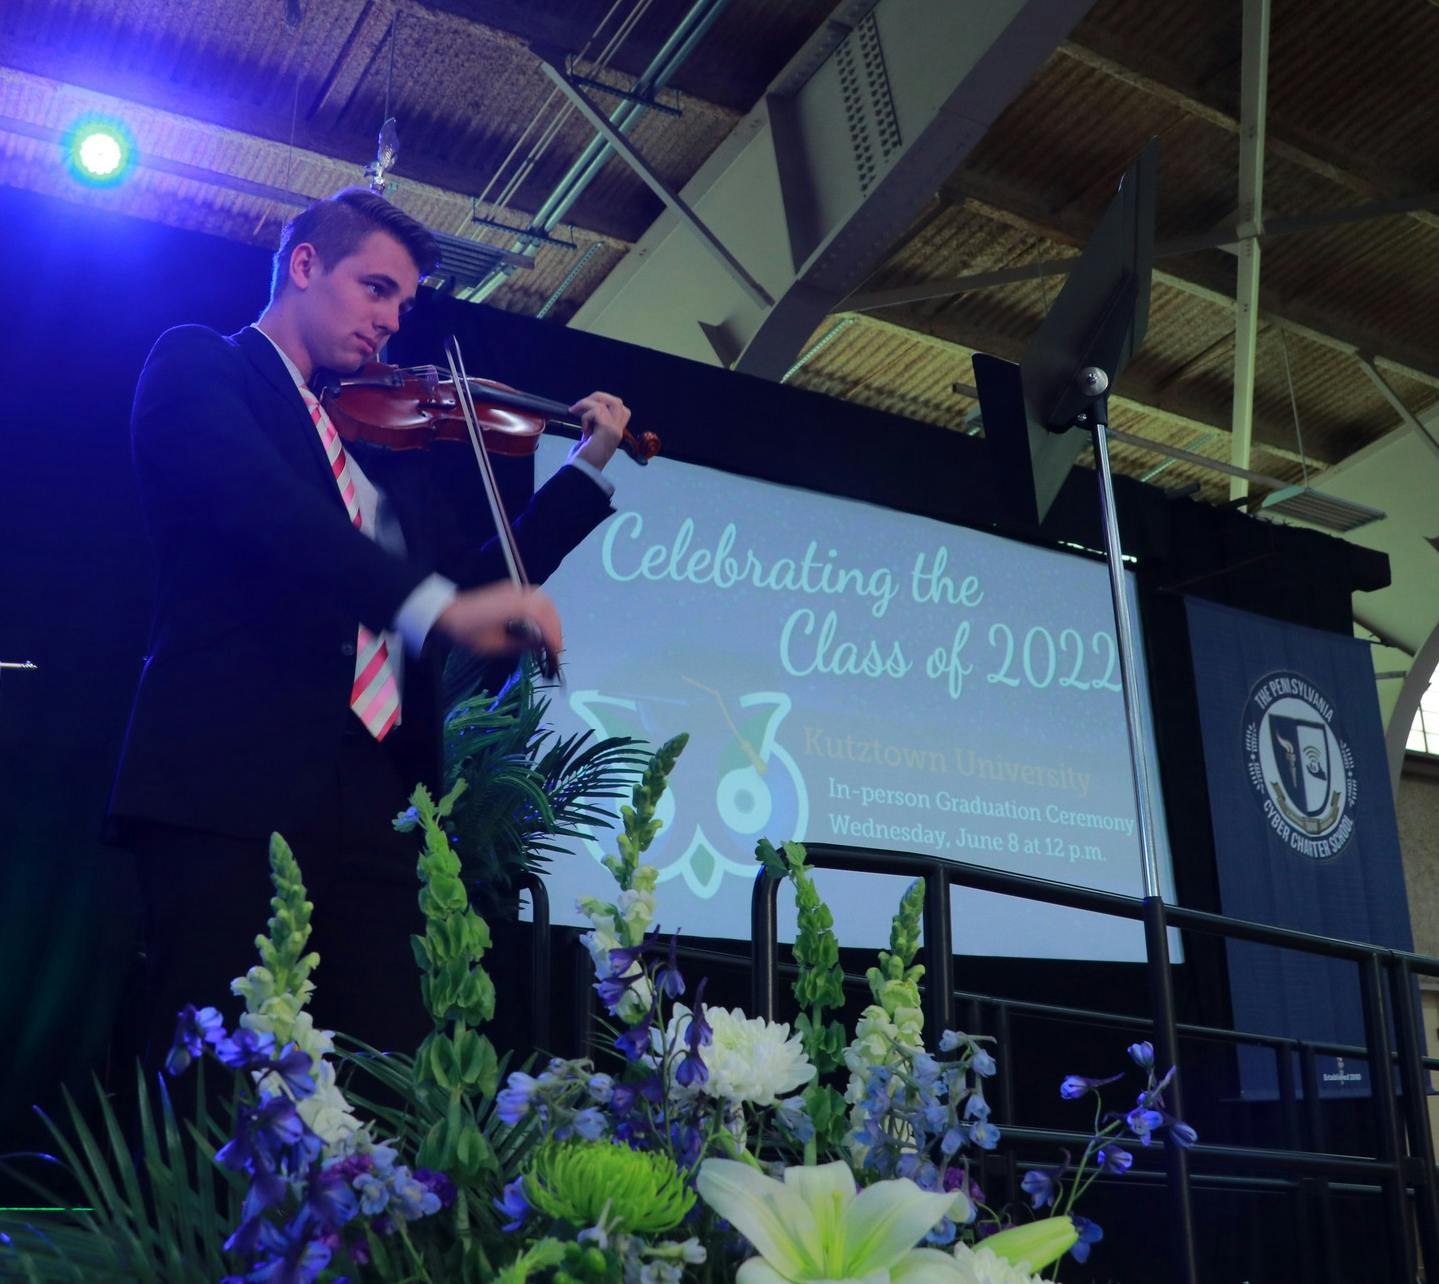 Student in cap and gown plays violin on stage at graduation ceremony.